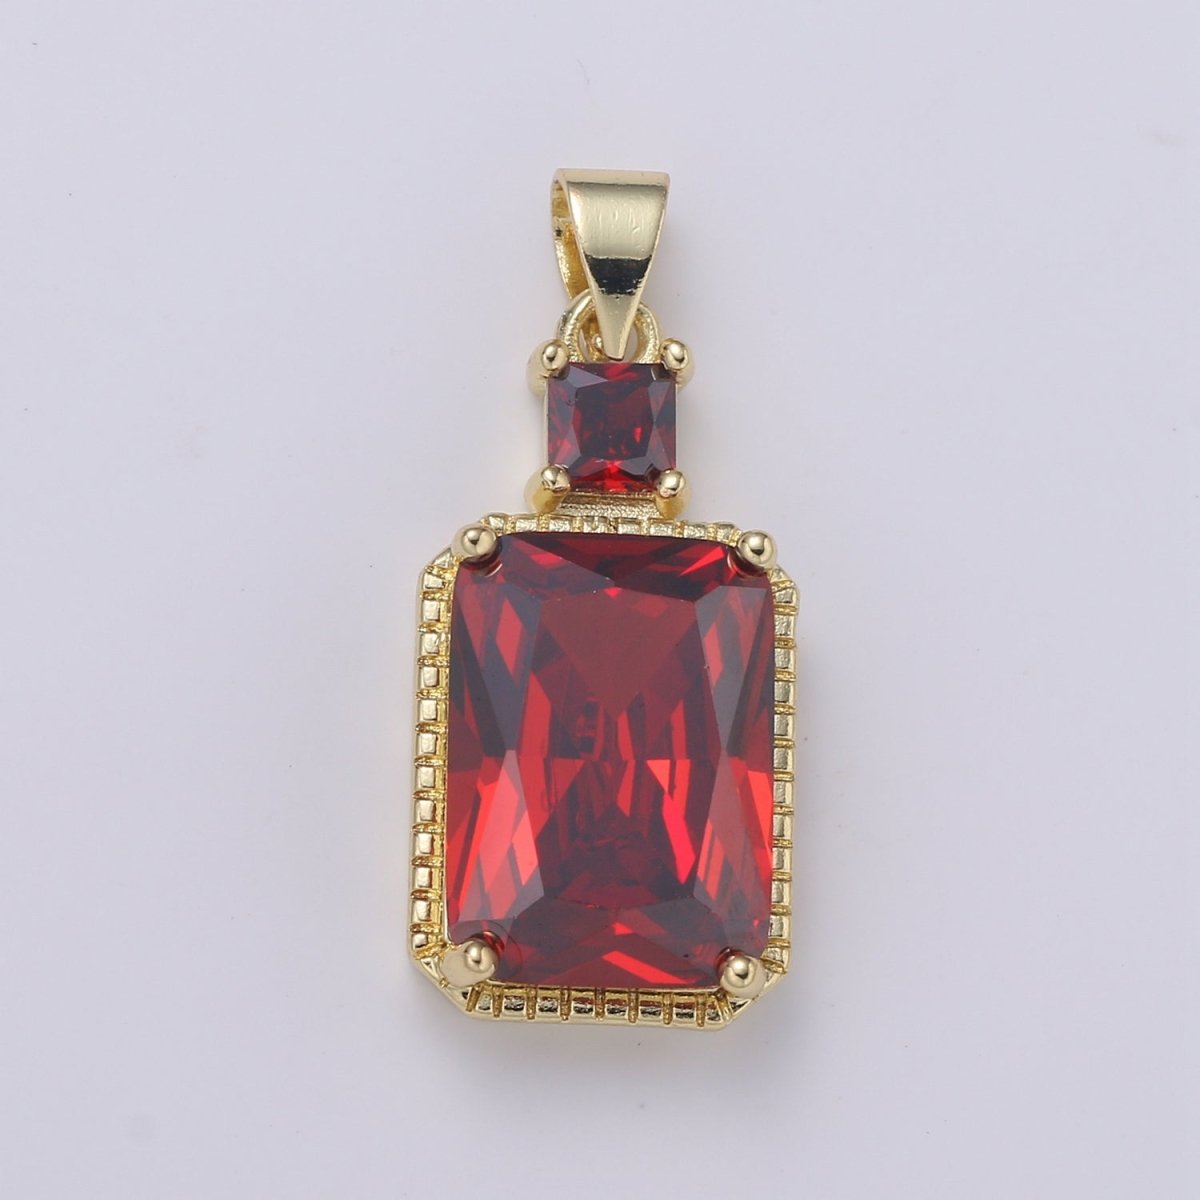 14k Gold Filled CZ Cubic Geometric Shape Pendant Blue Pink Lavender Red Emerald Cut Charm Necklace Earring Supply Component 28x12mm H-367 H-368 H-375 H-376 - DLUXCA